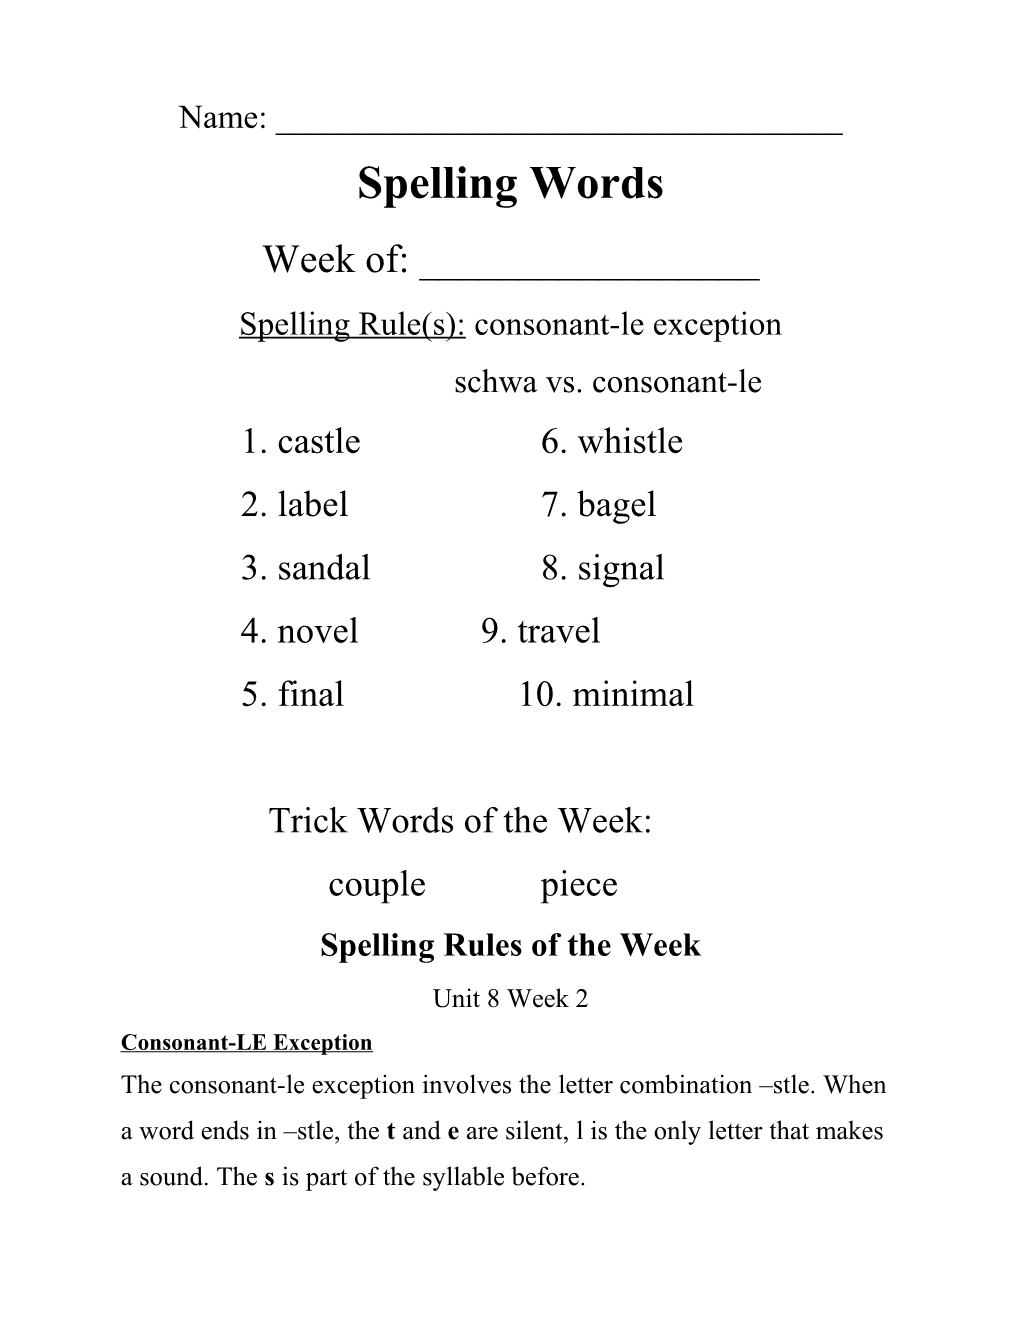 Spelling Rule(S):Consonant-Le Exception